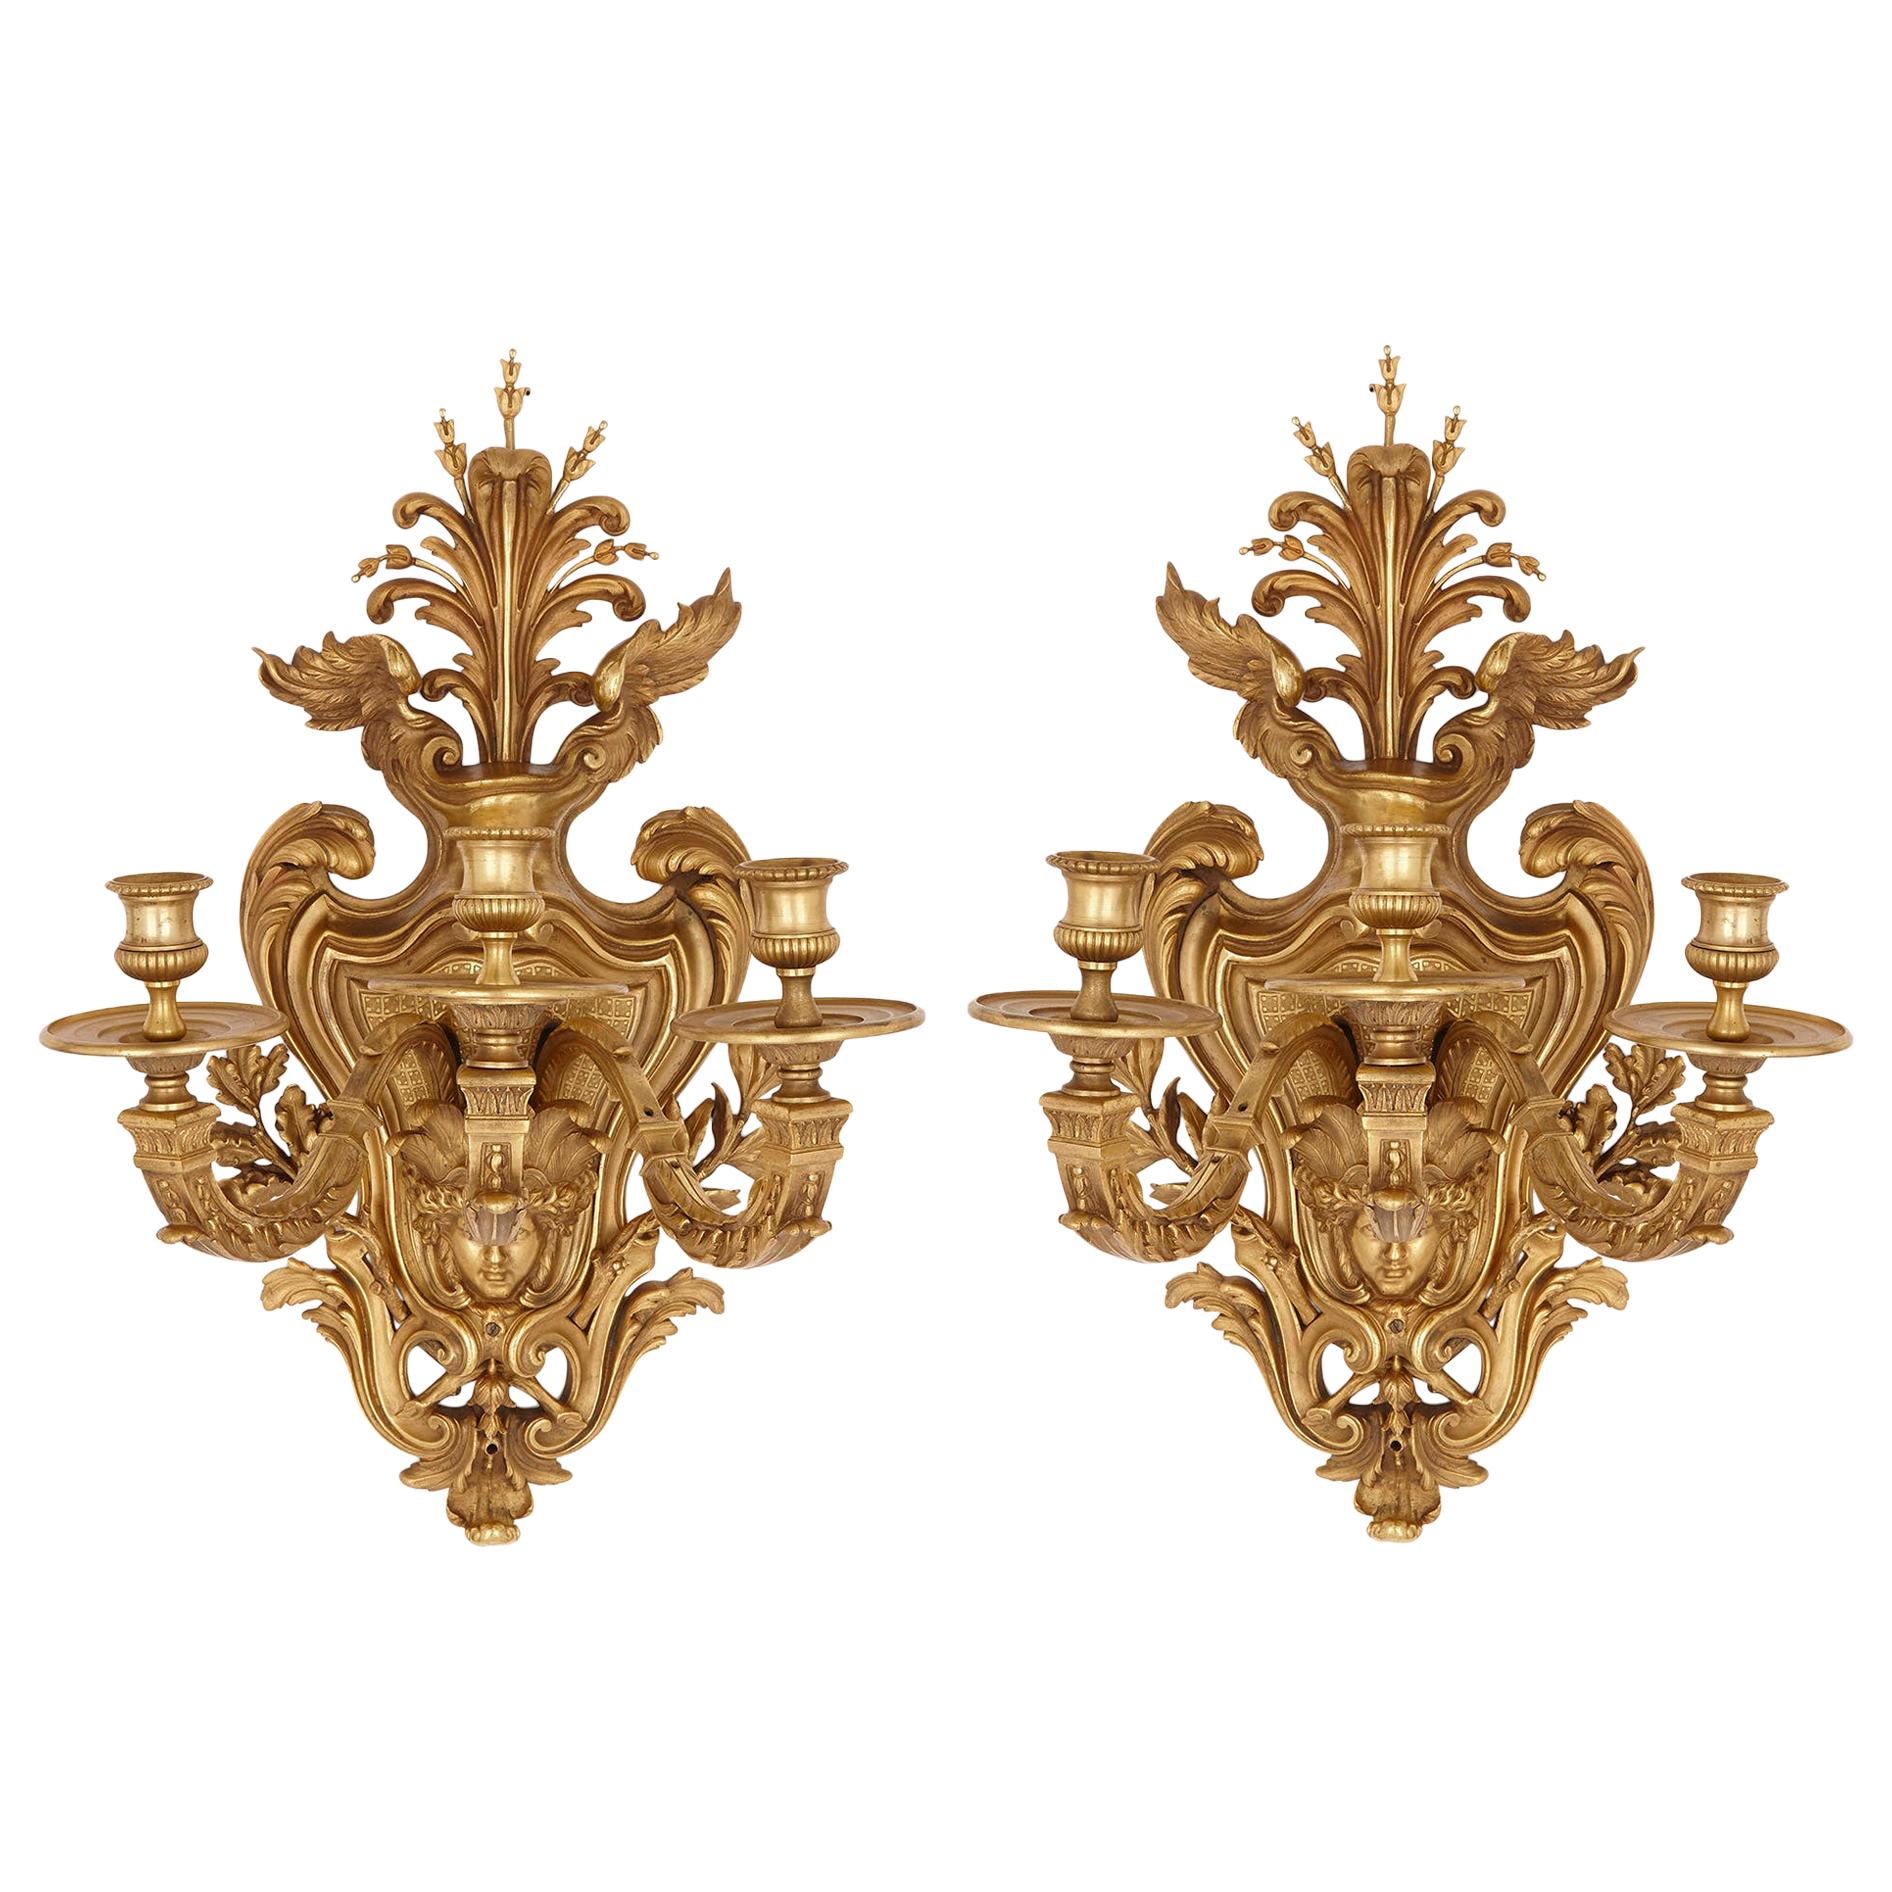 Pair of Large Gilt Bronze Sconces in the Régence Style